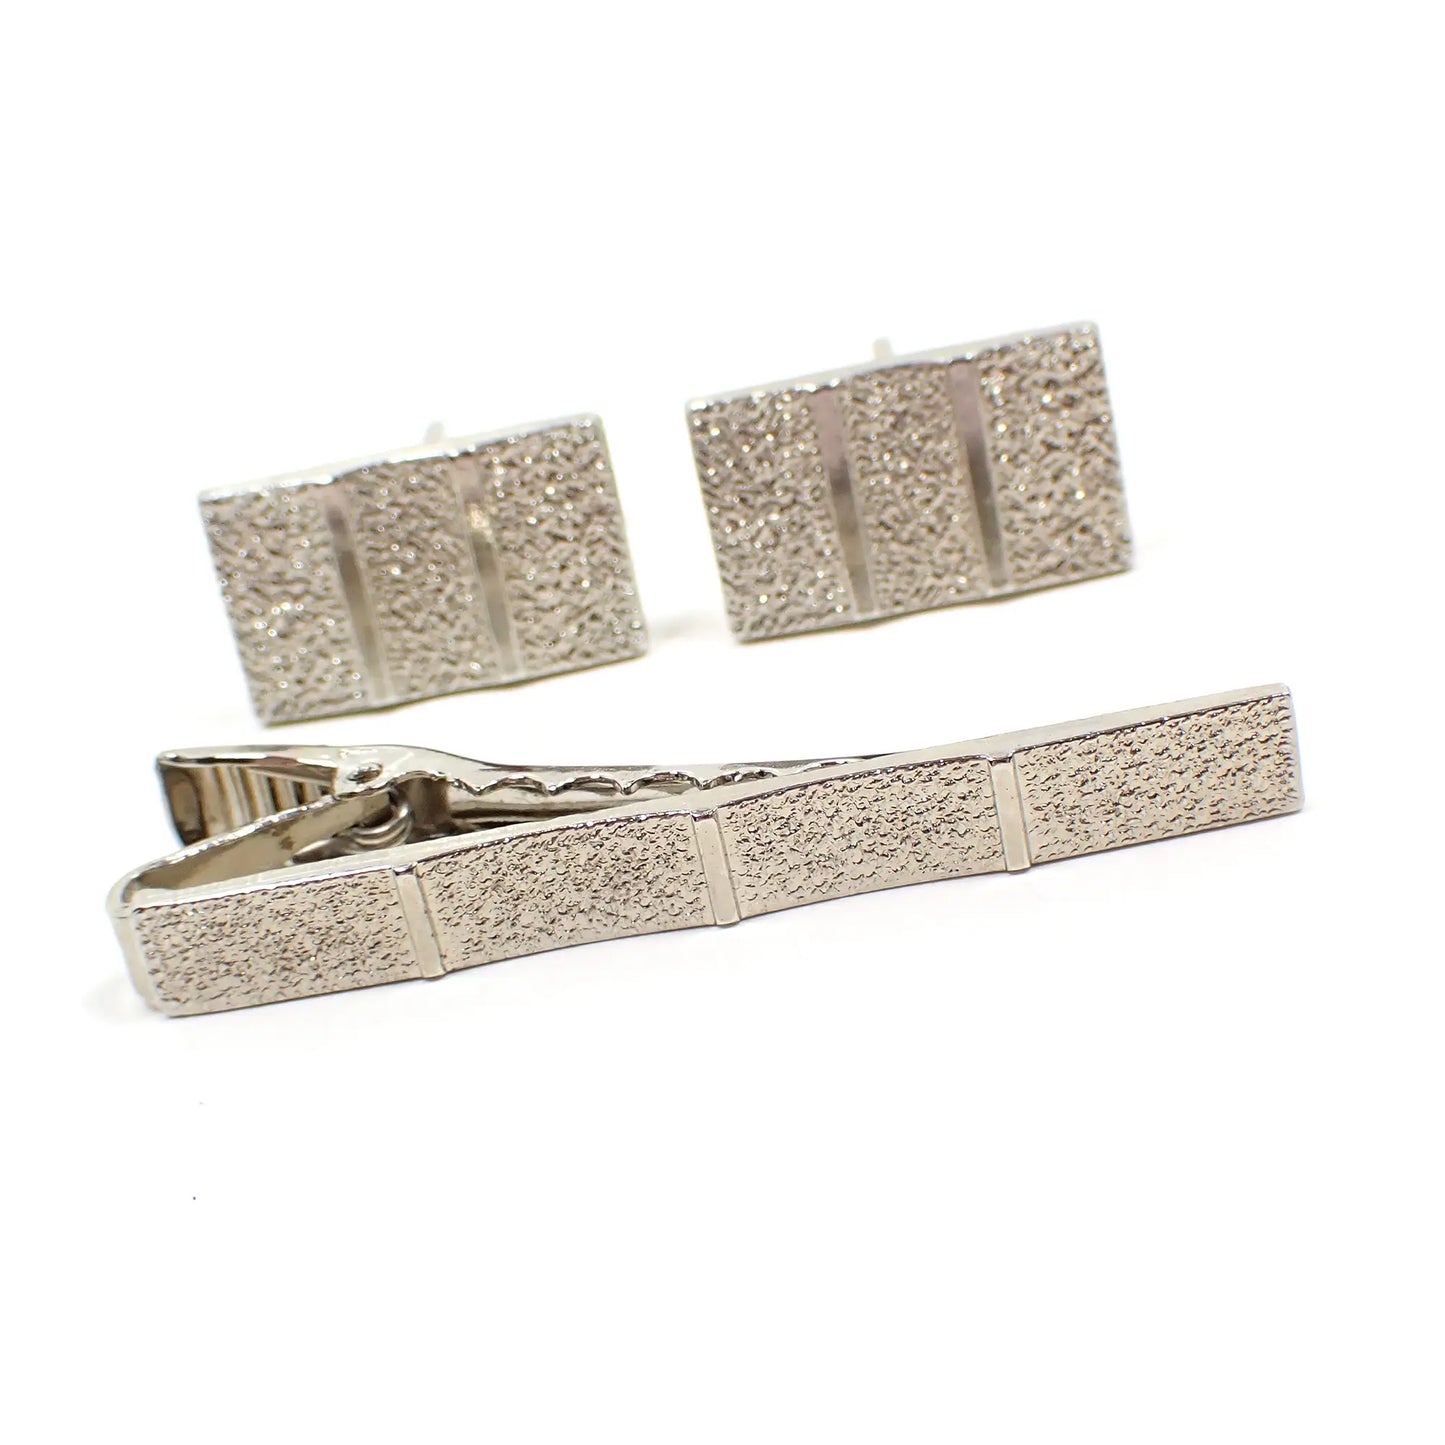 1960's Textured Silver Tone Modernist Vintage Men's Jewelry Set, Tie Clip Clasp and Cufflinks Cuff Links